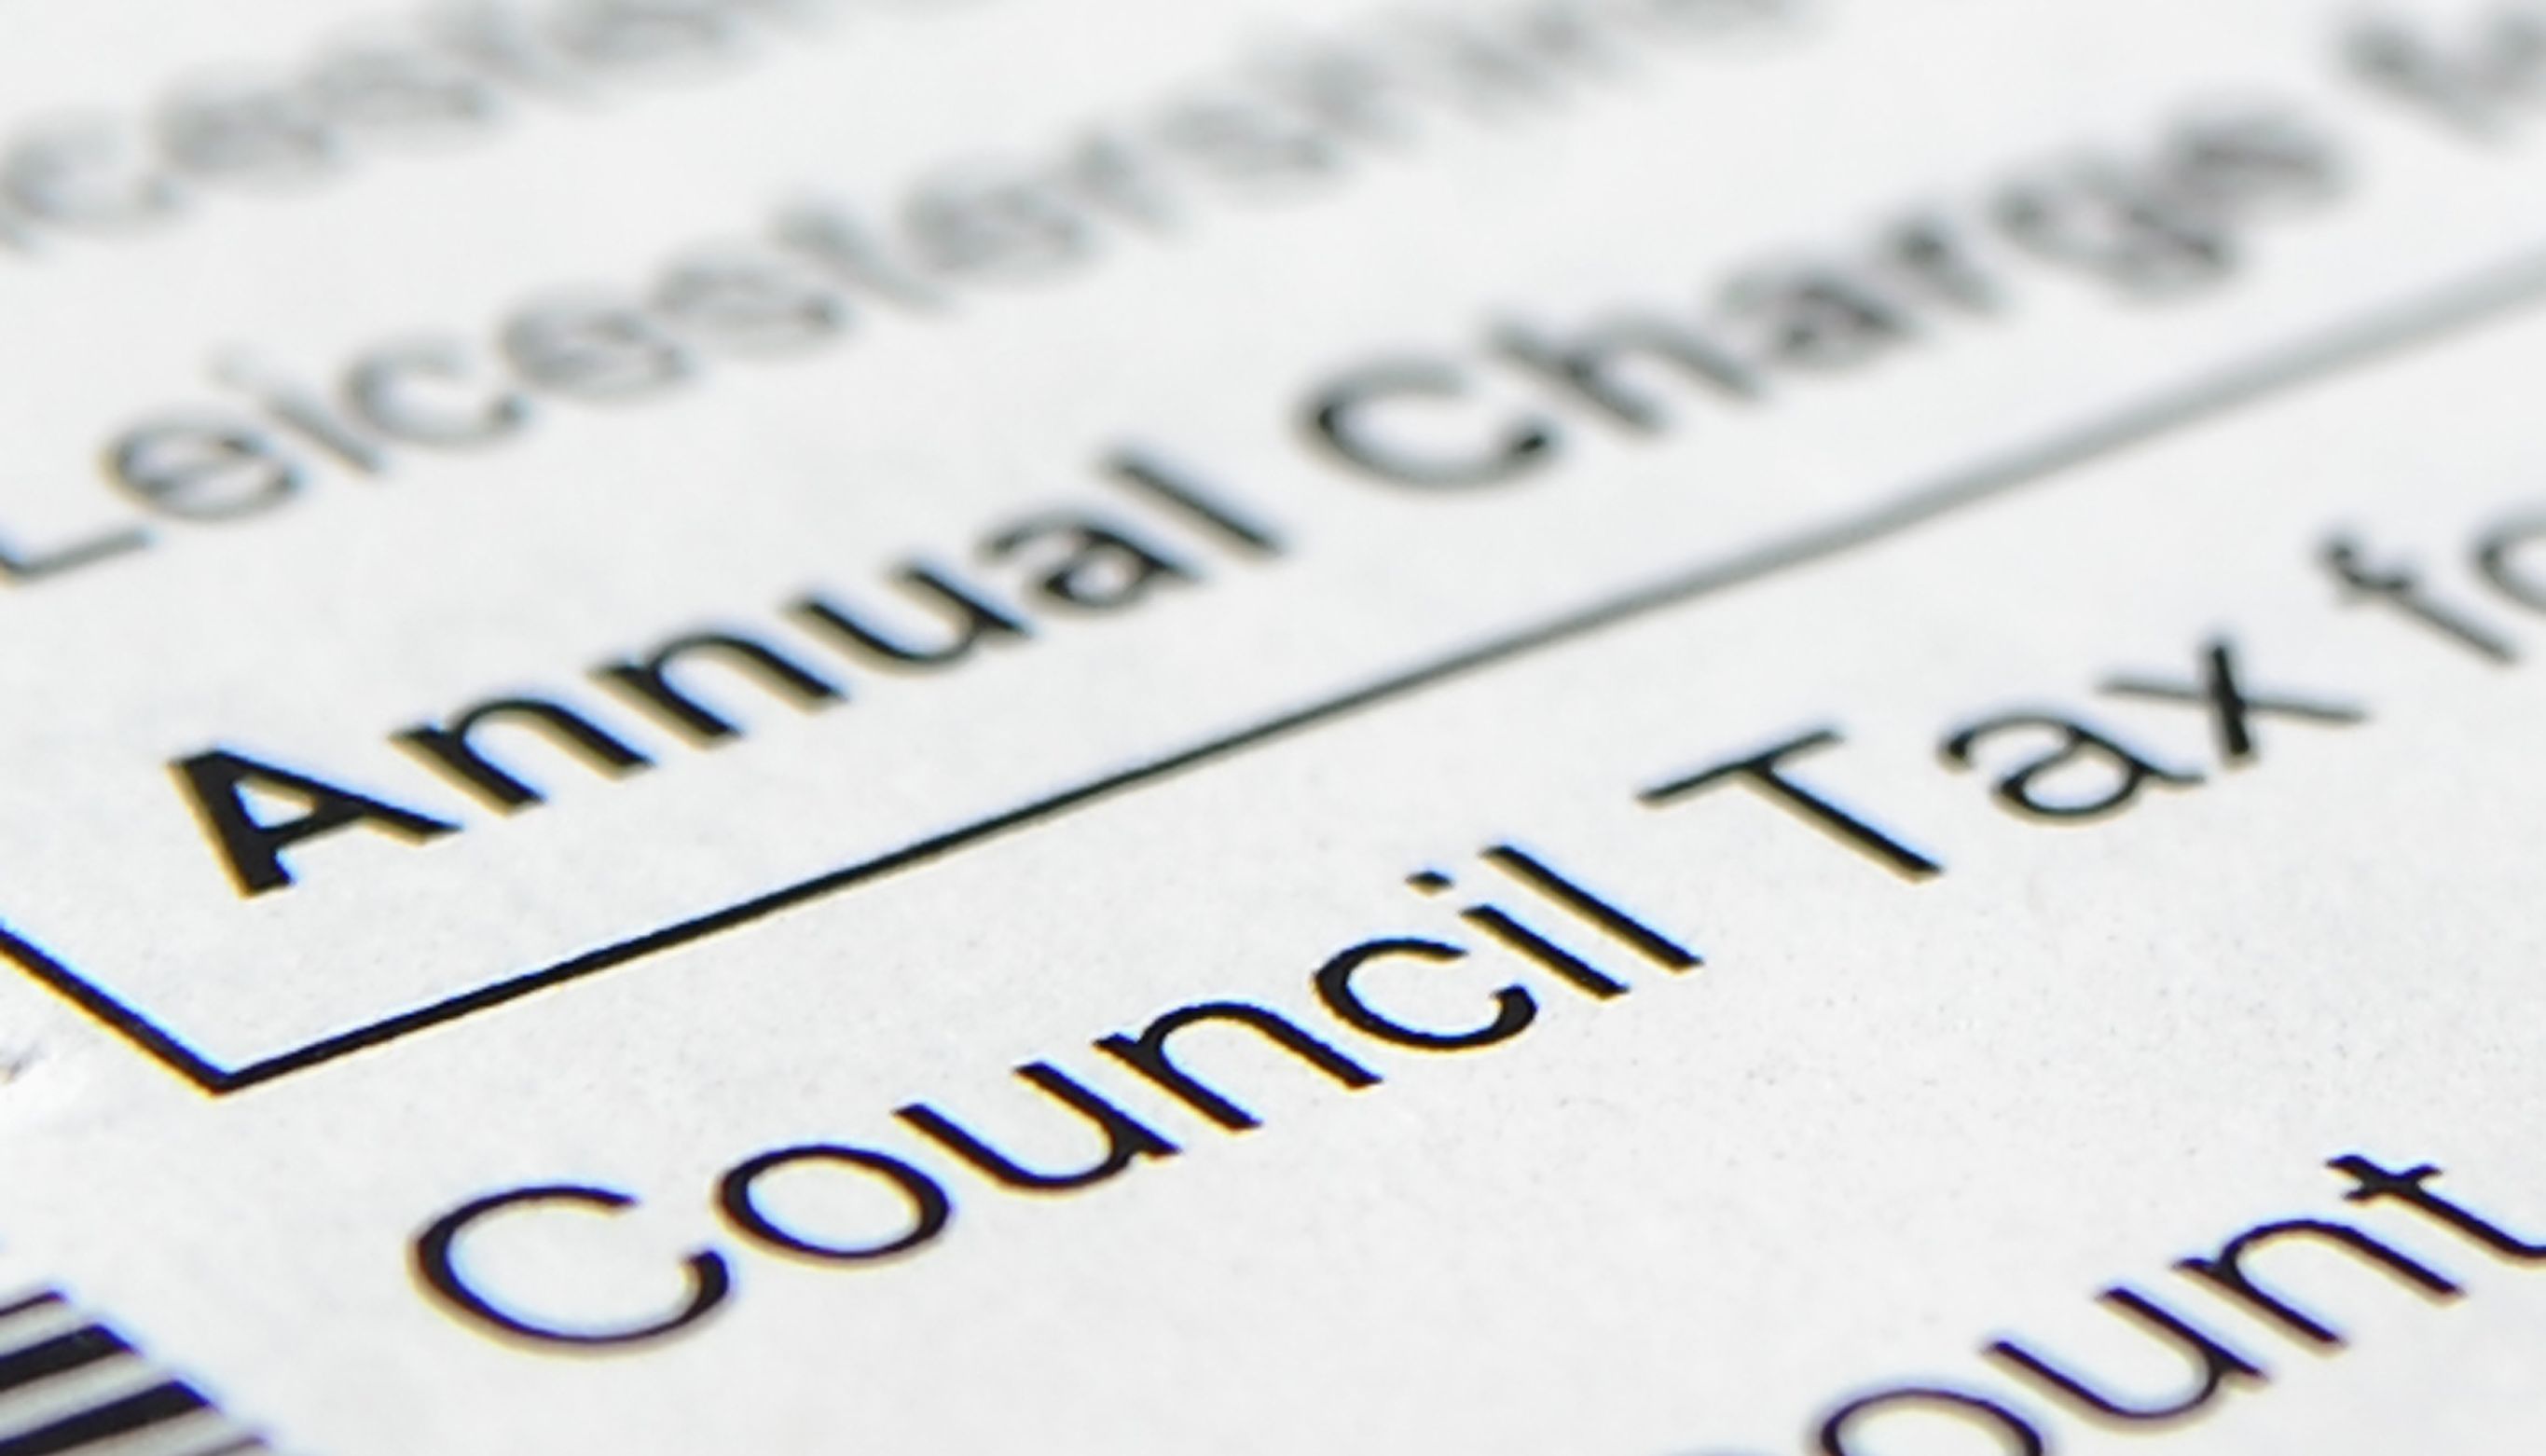 council-tax-britons-risk-missing-out-on-150-rebate-if-they-don-t